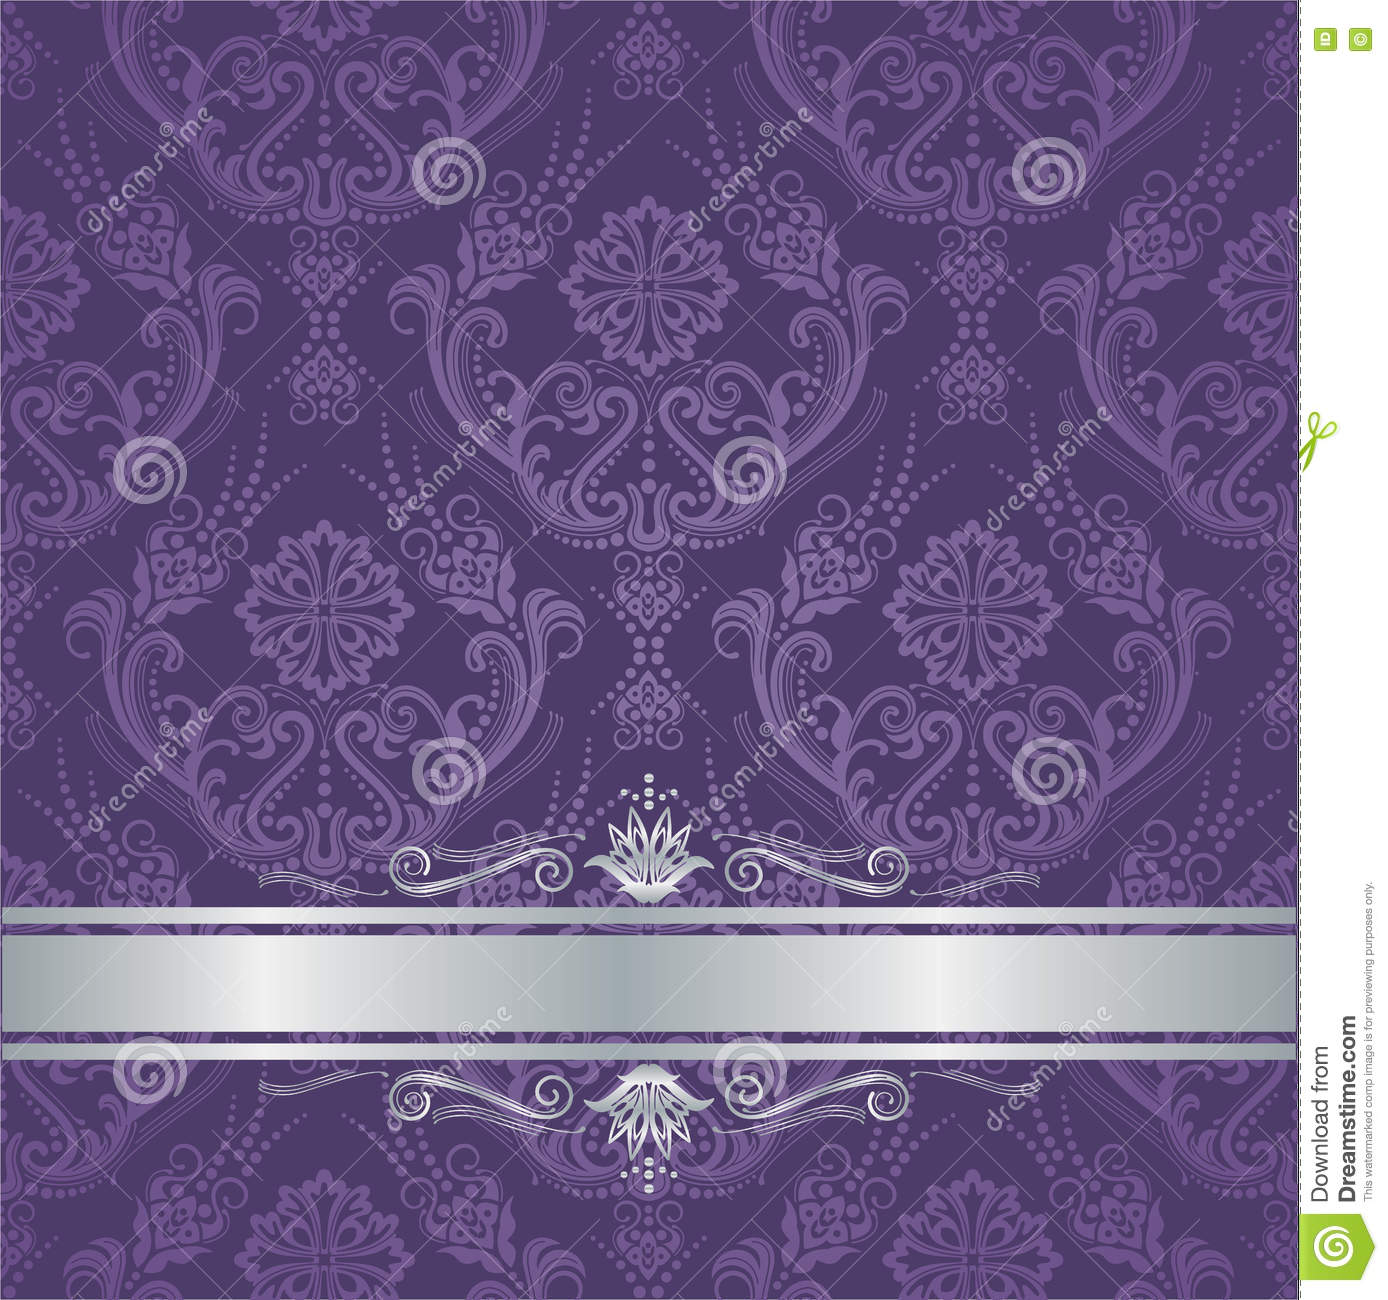 Luxury Purple Floral Damask Cover Silver Border - Damask Wallpaper Texture Seamless - HD Wallpaper 